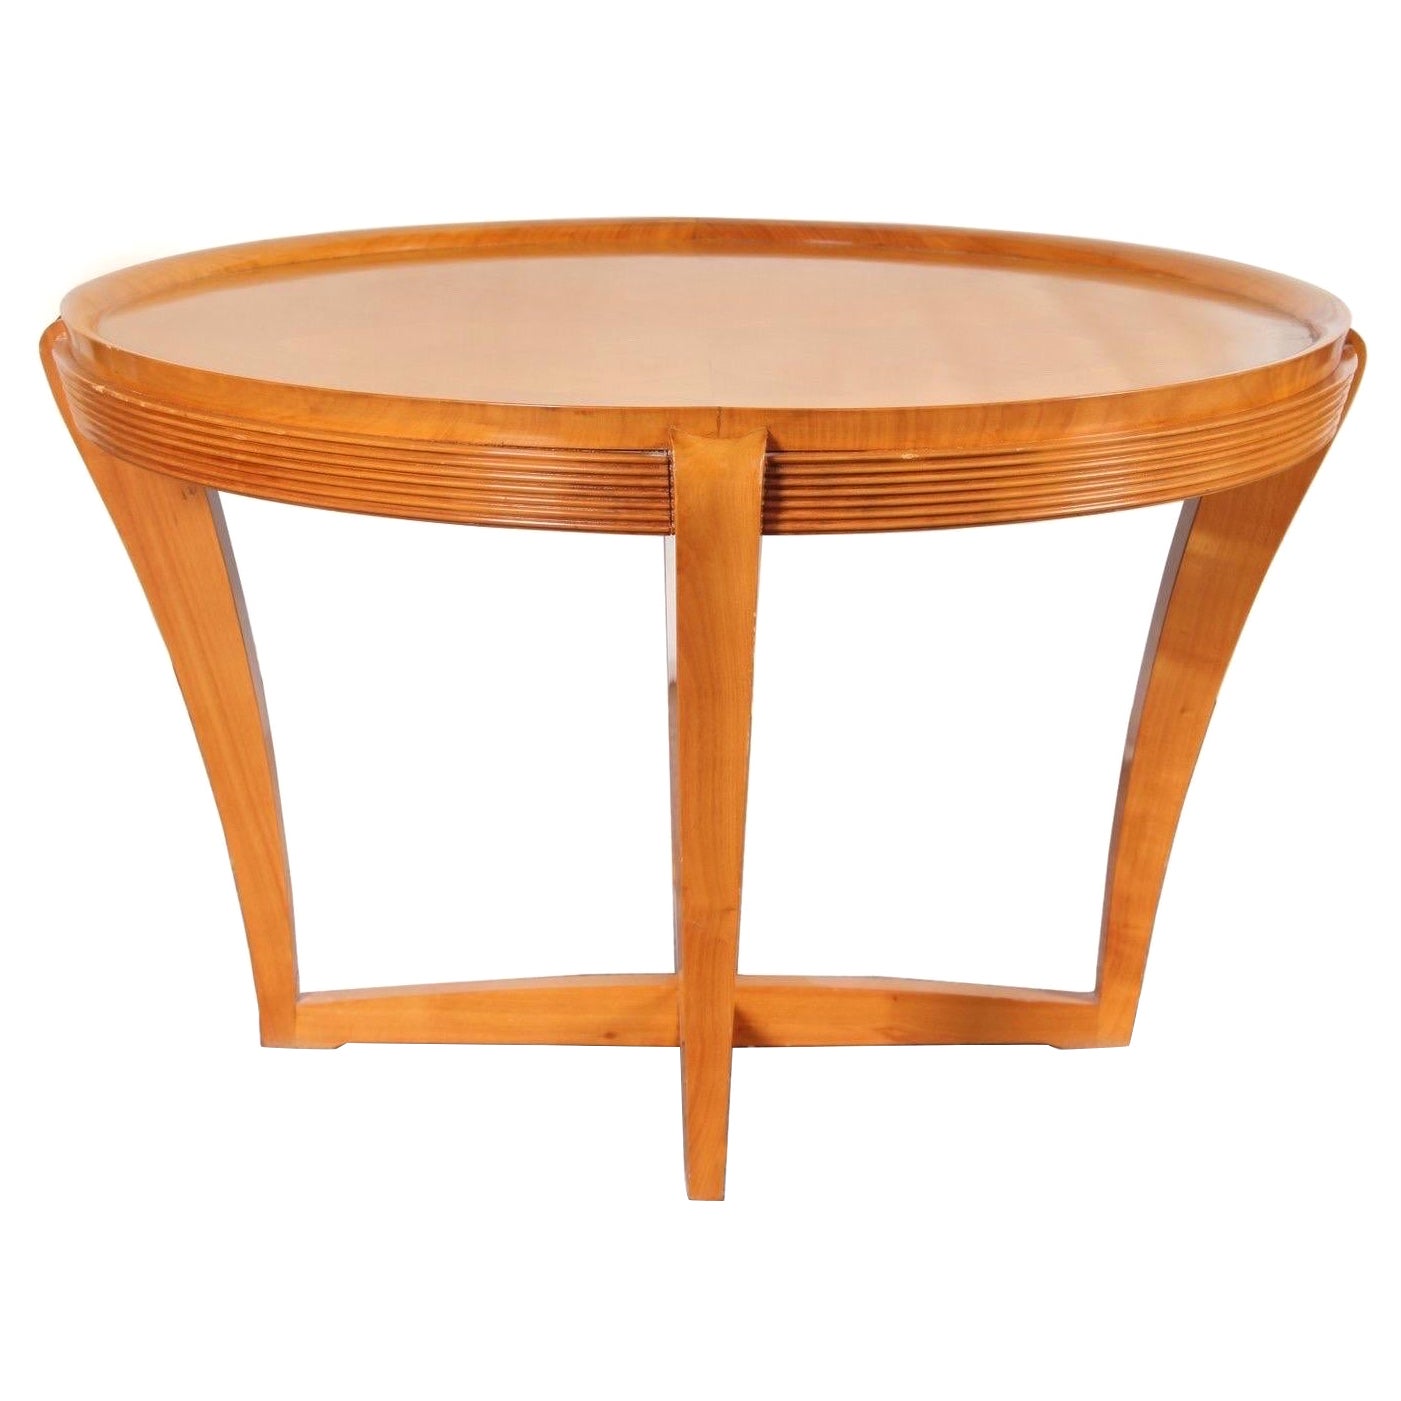 French Art Deco Satinwood Cocktail Table ~ circa 1940